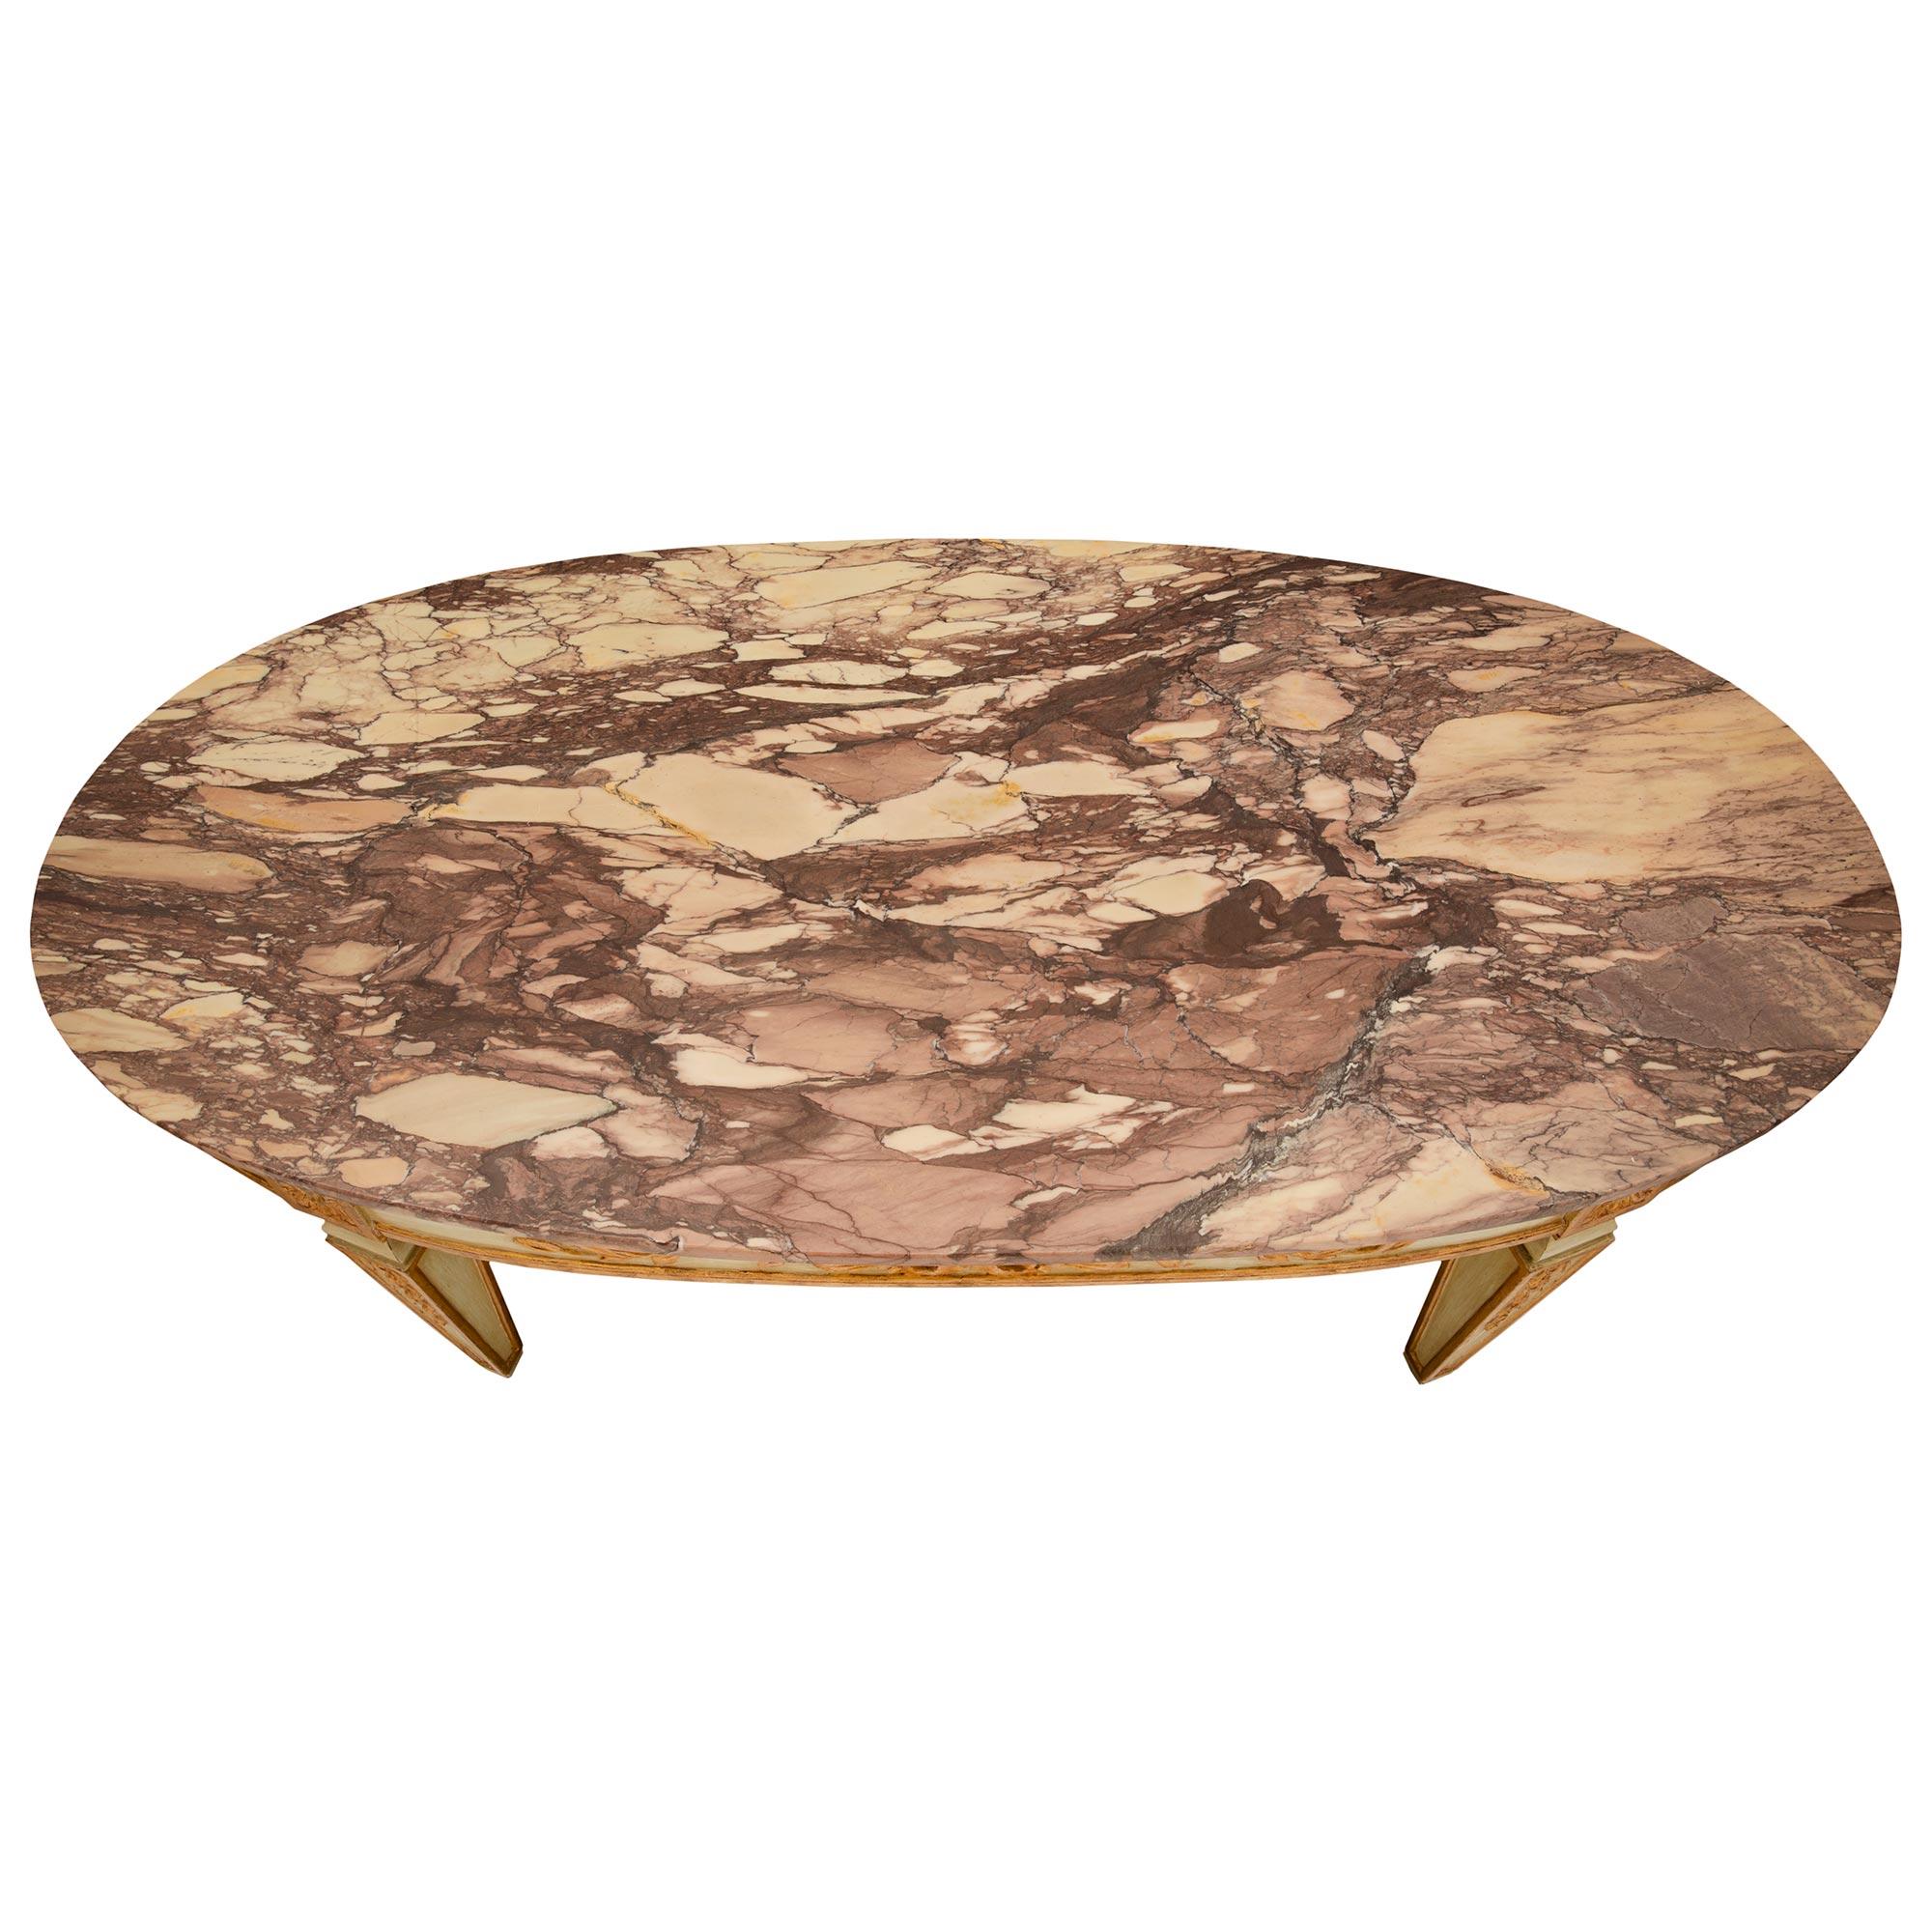 A beautiful Italian, turn of the century Louis XVI St. patinated wood, giltwood and Brèche violette marble coffee table. The oblong shaped table is raised by elegant square tapered legs with finely carved gilt foliate garlands framed within gilt